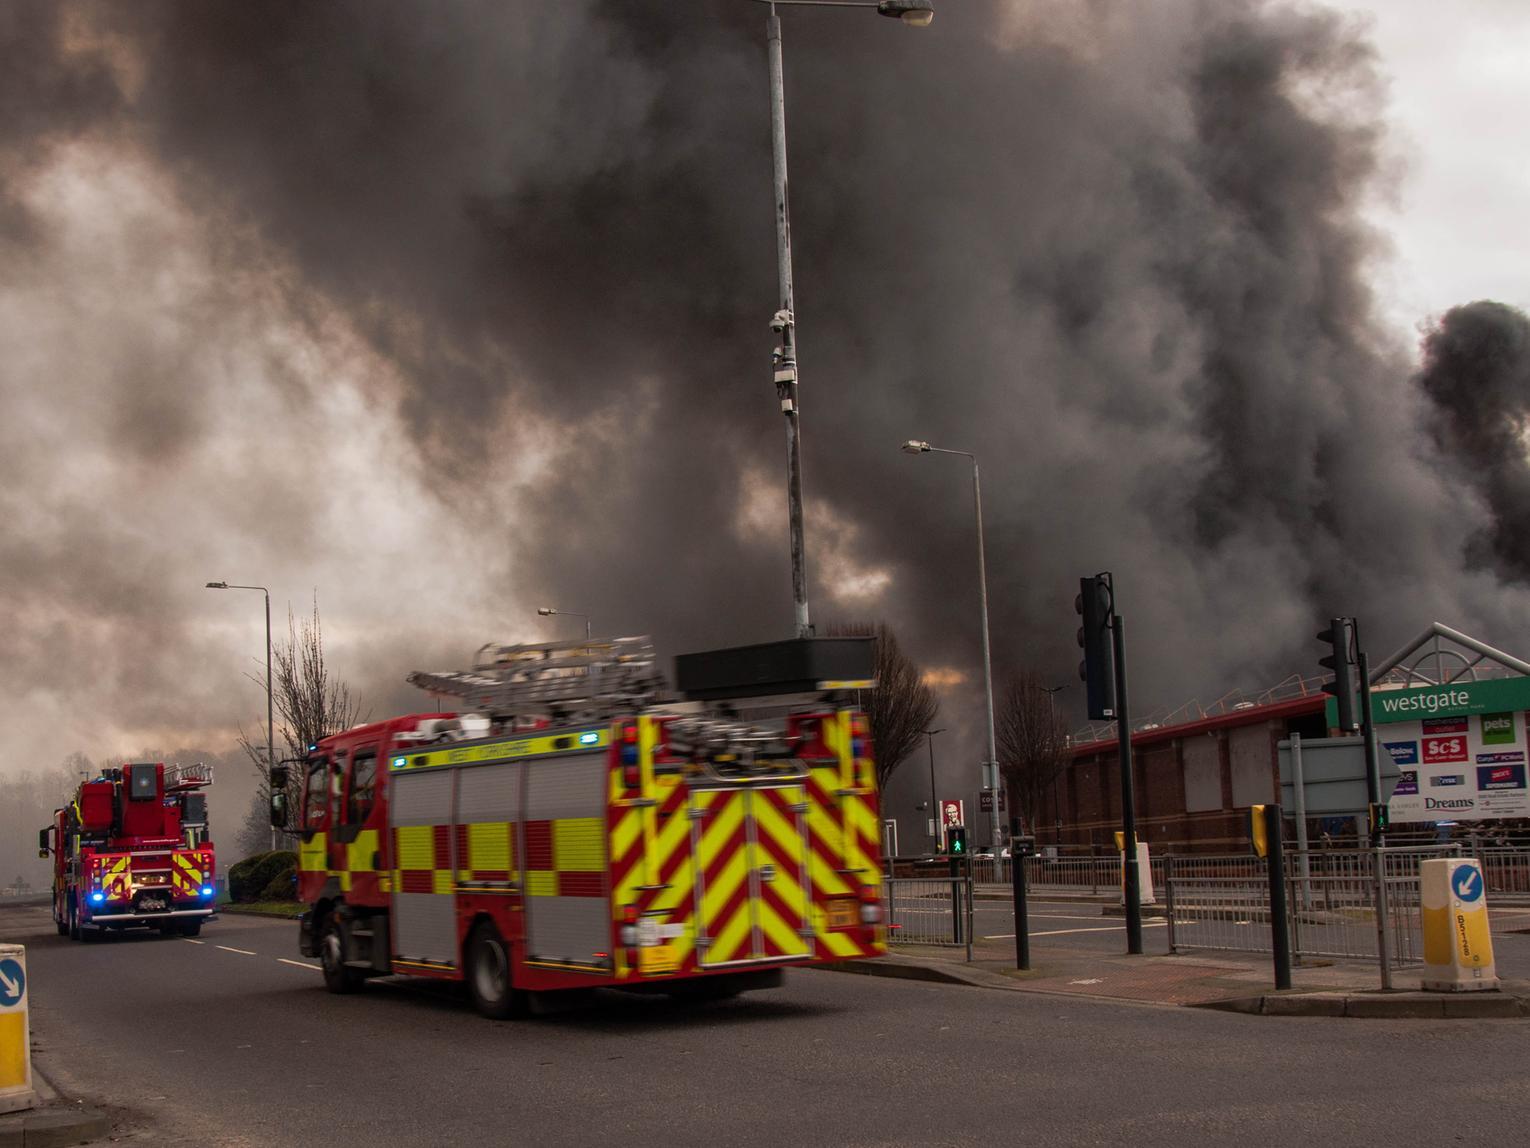 Shops and houses were left without power in the hours following the fire.